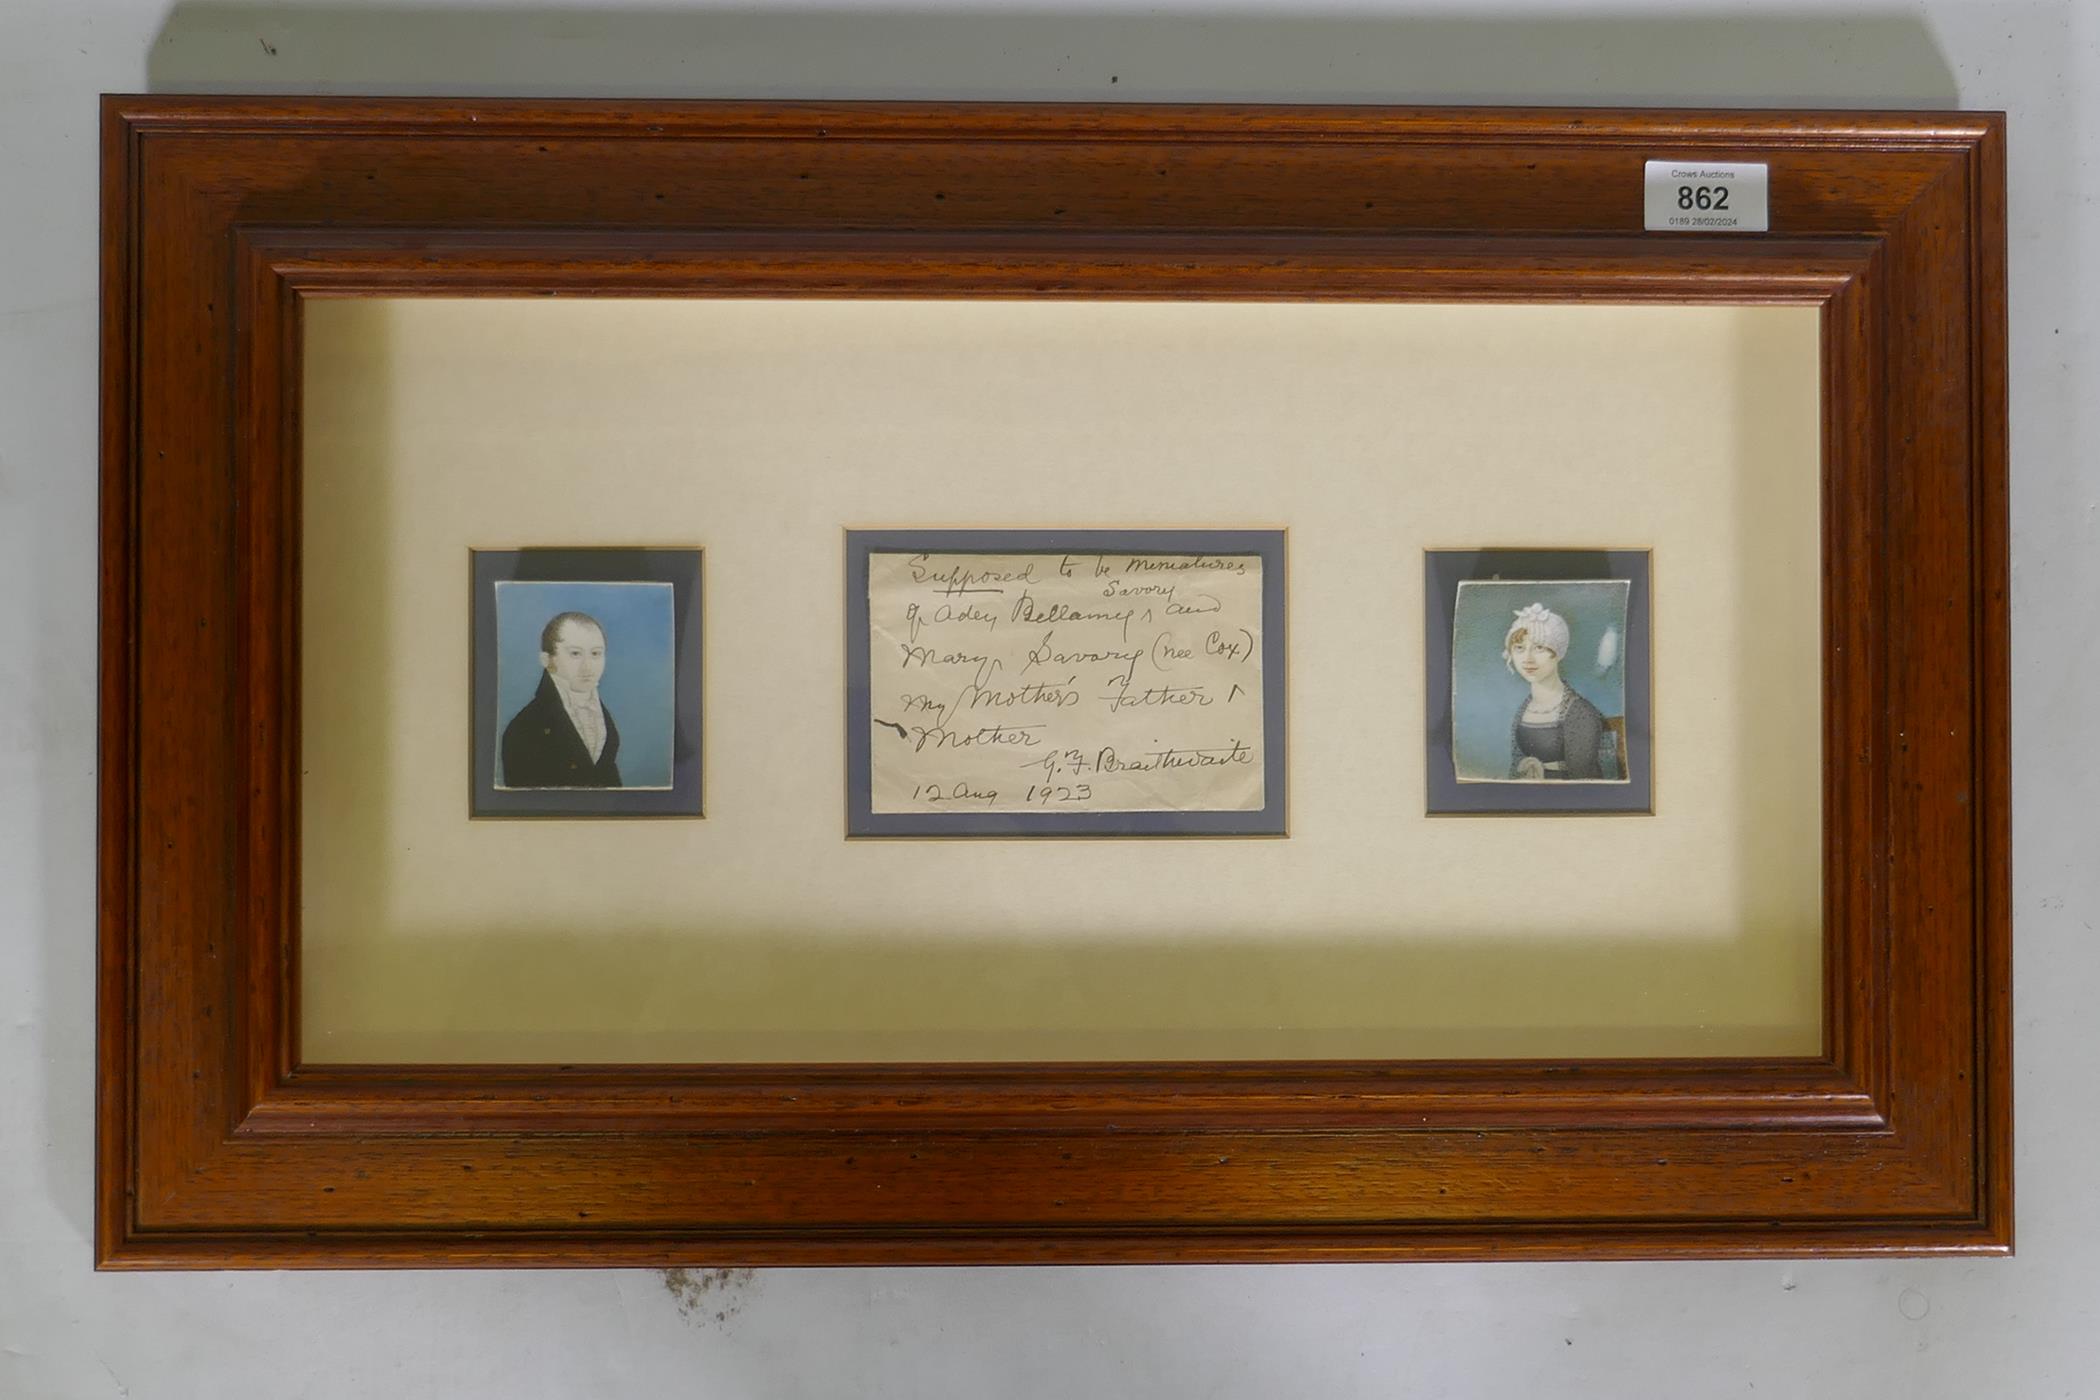 A pair of early C19th portrait miniatures of a lady and gentleman with hand written note, "